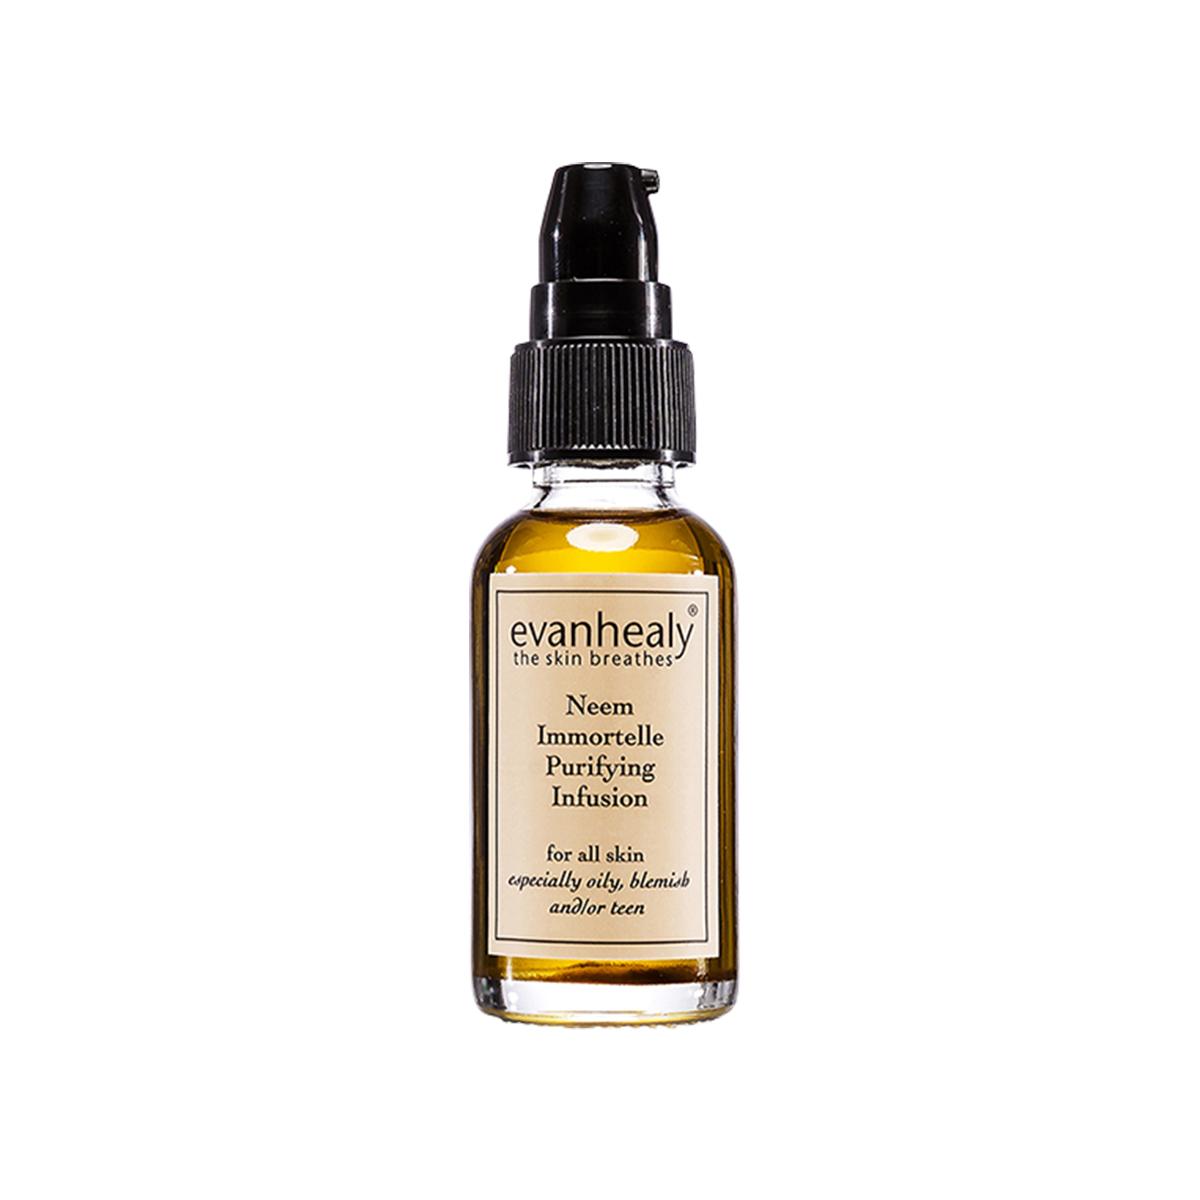 Primary image of Neem Immortelle Purifying Infusion